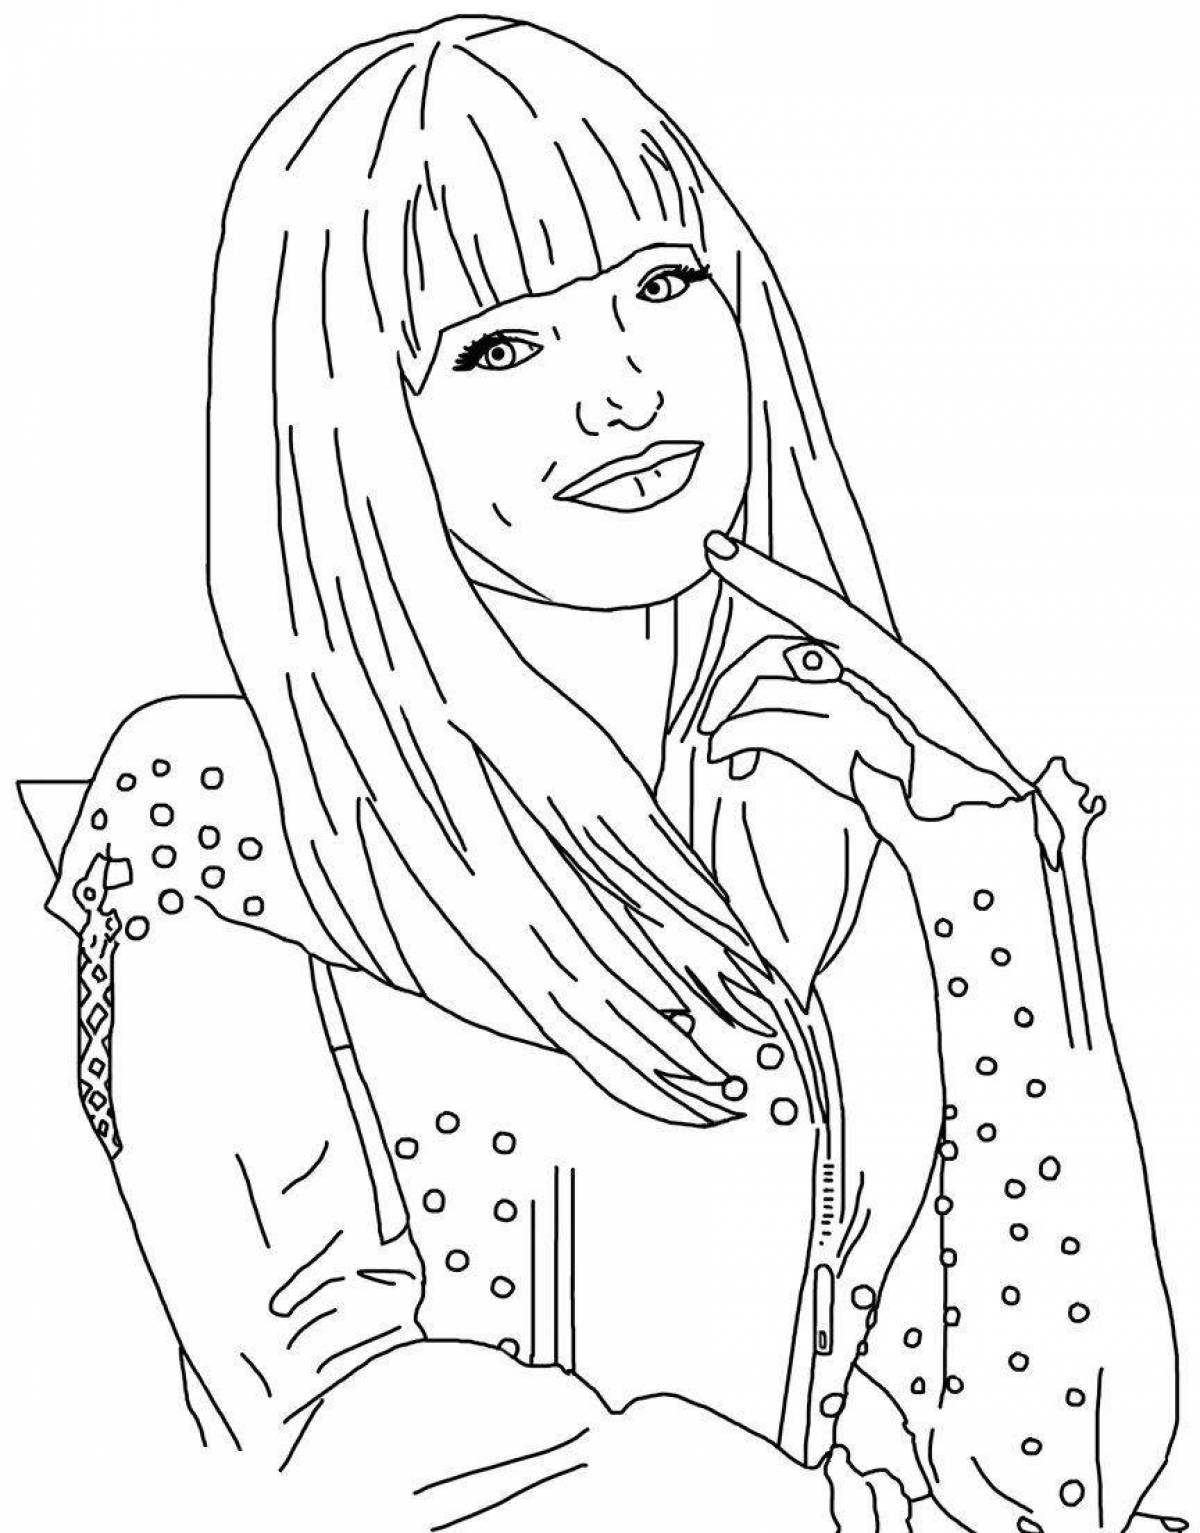 Coloring page wonderful heirs